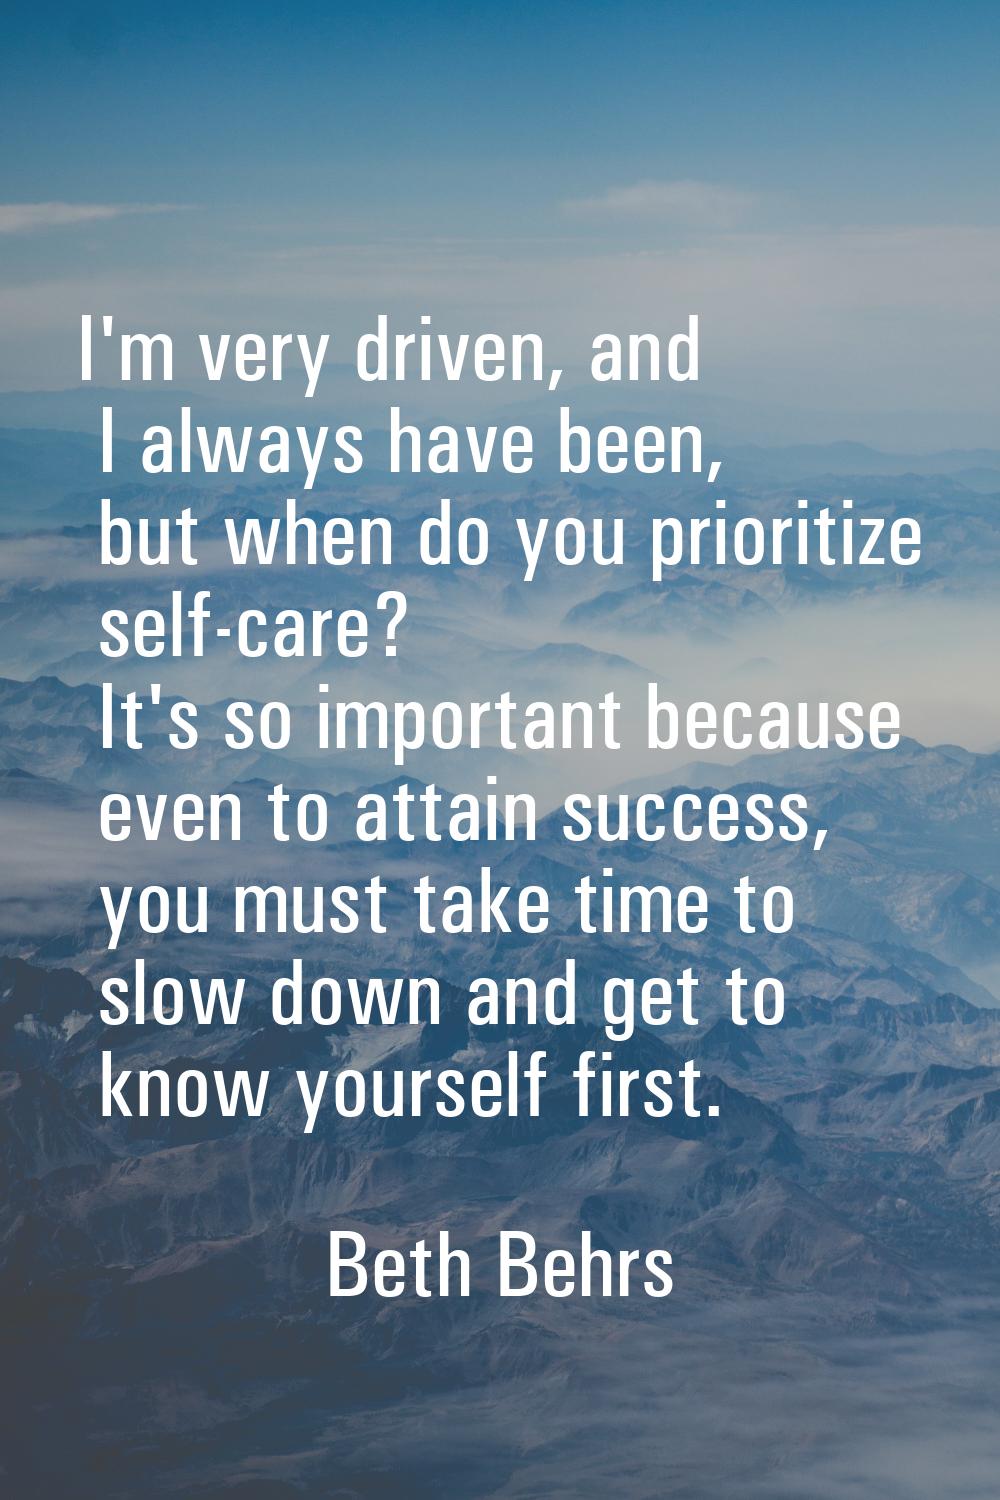 I'm very driven, and I always have been, but when do you prioritize self-care? It's so important be